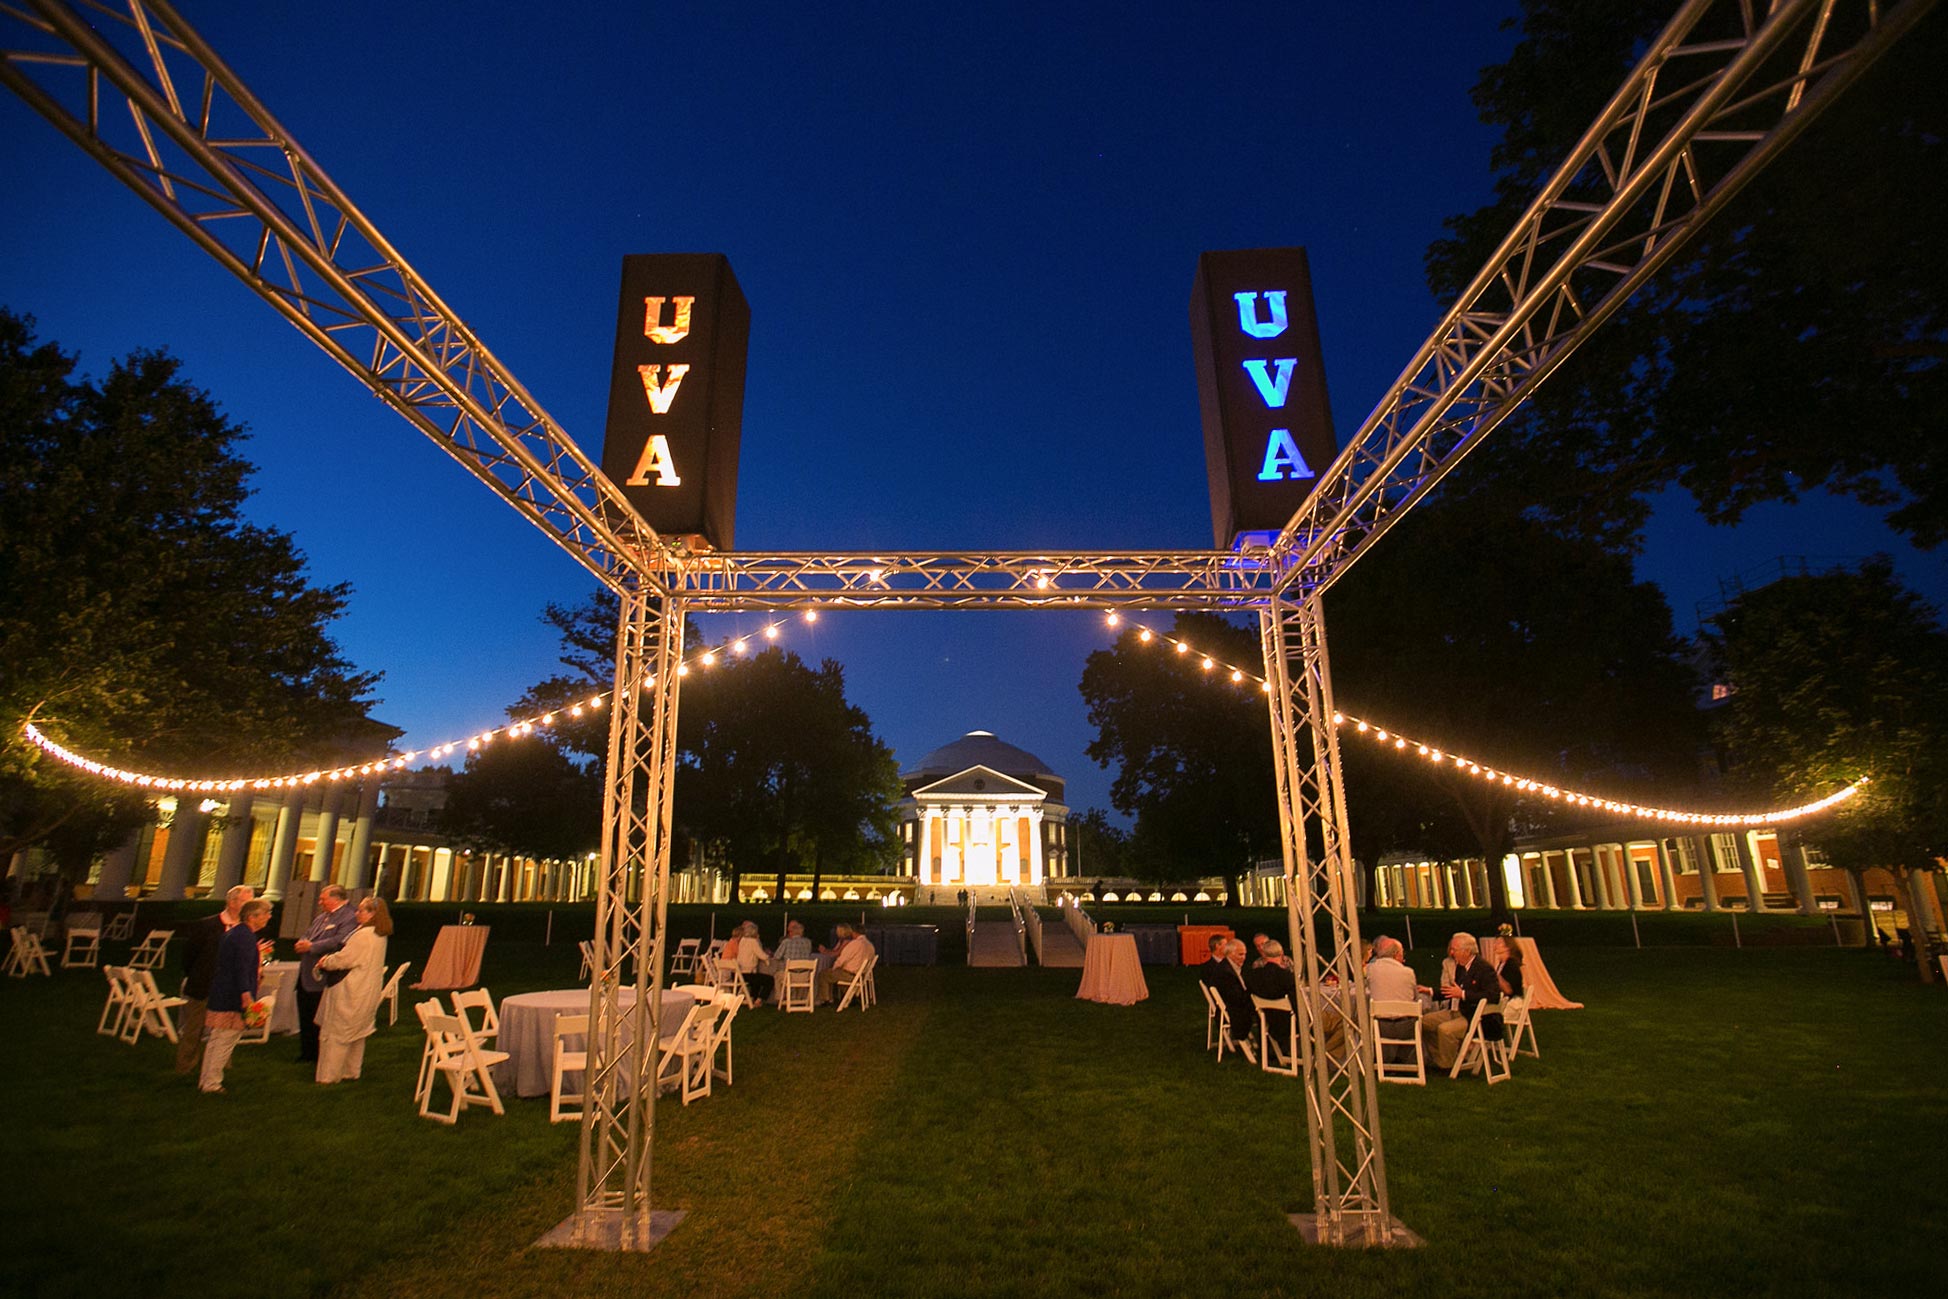 Tables on the lawn with a metal structure that hold lights that say UVA